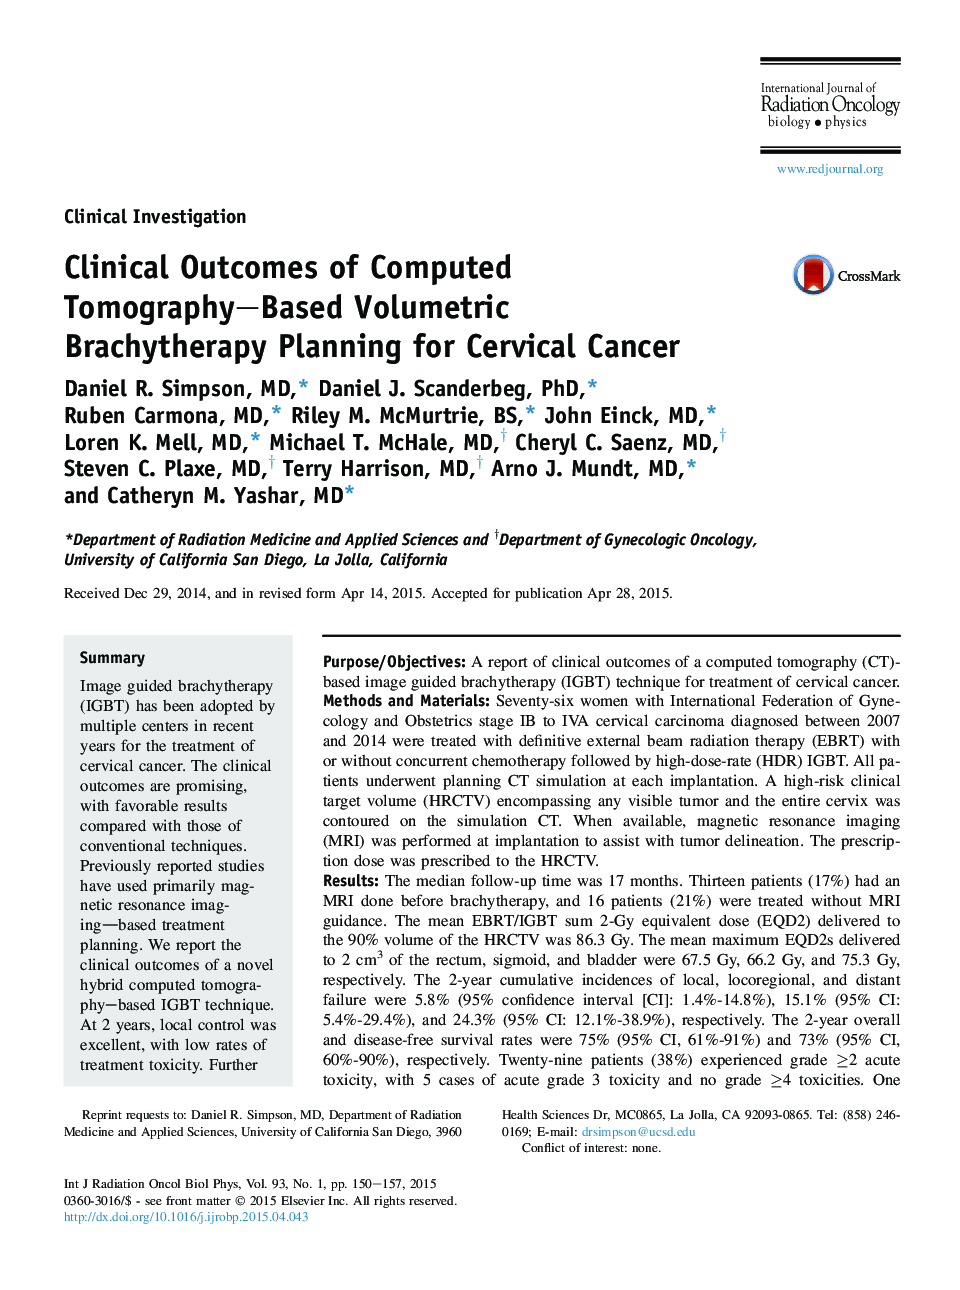 Clinical Outcomes of Computed Tomography-Based Volumetric Brachytherapy Planning for Cervical Cancer